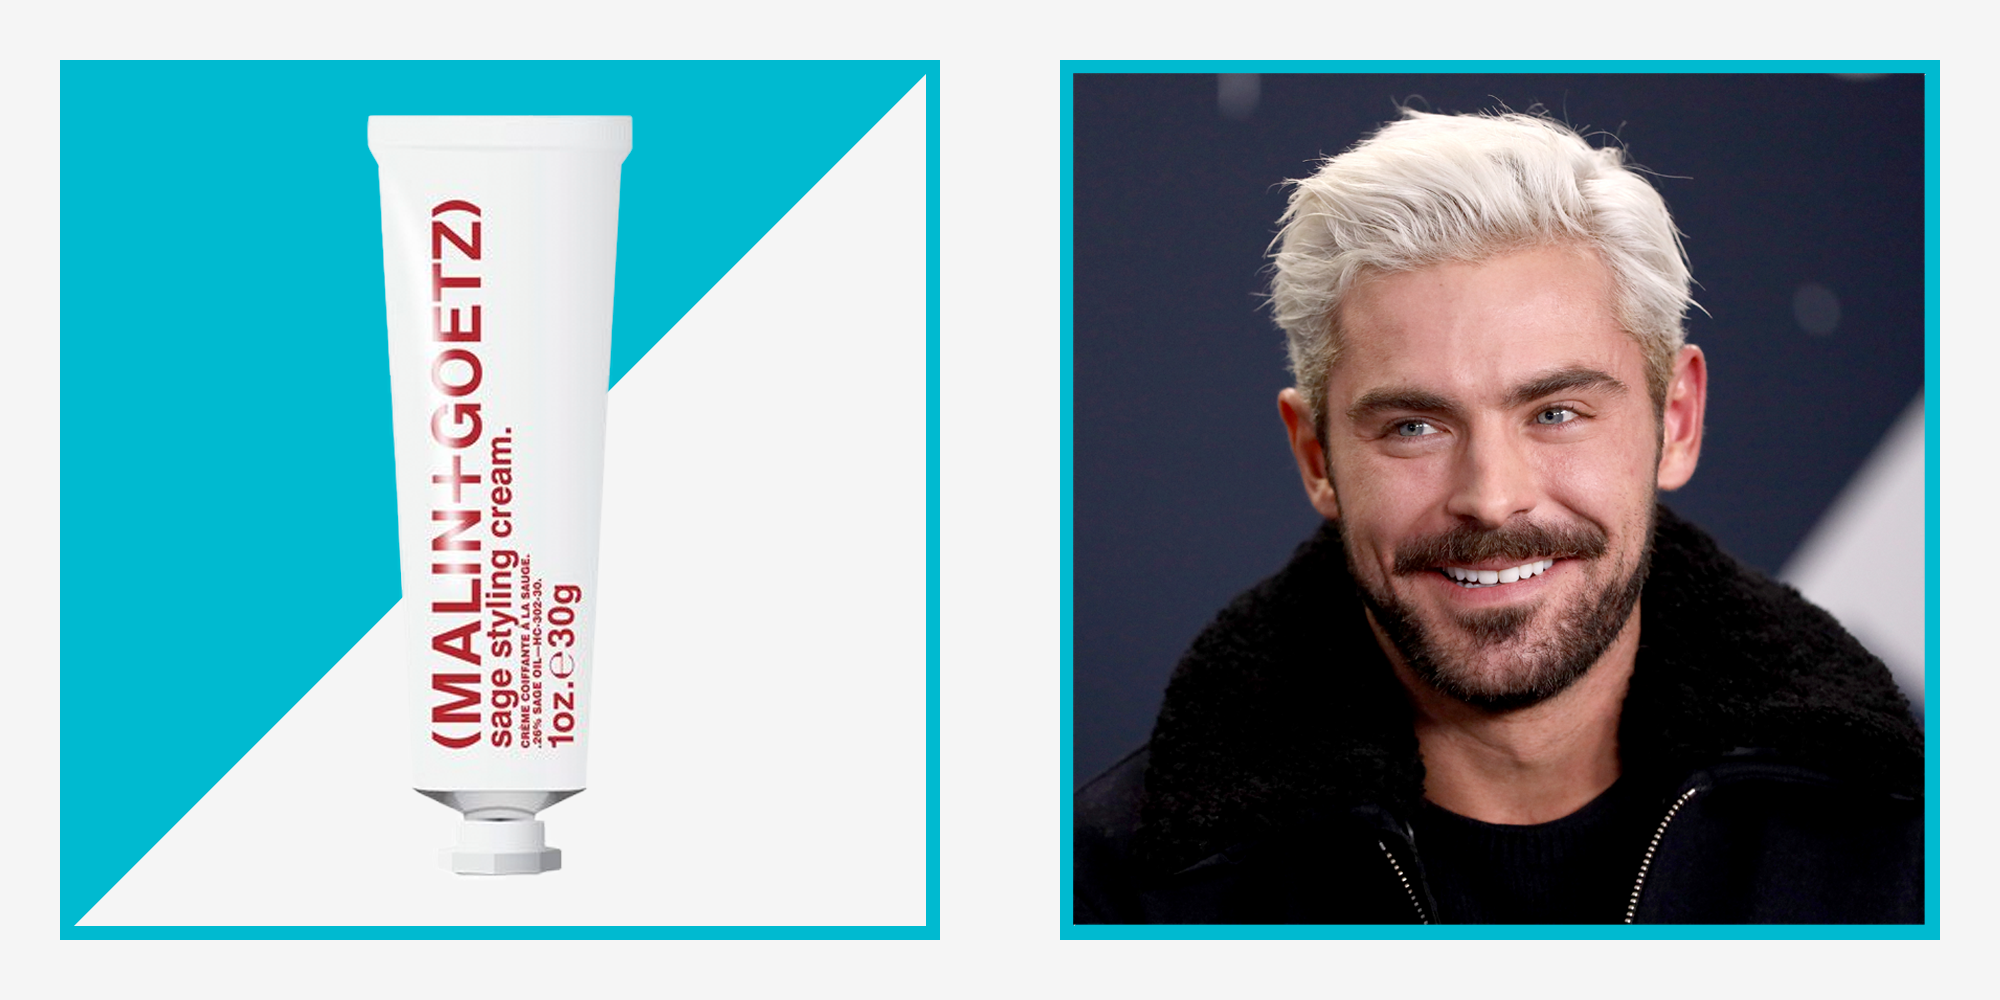 6 Bleached Blond Hair Do's and Don'ts For Men - How to Go Platinum